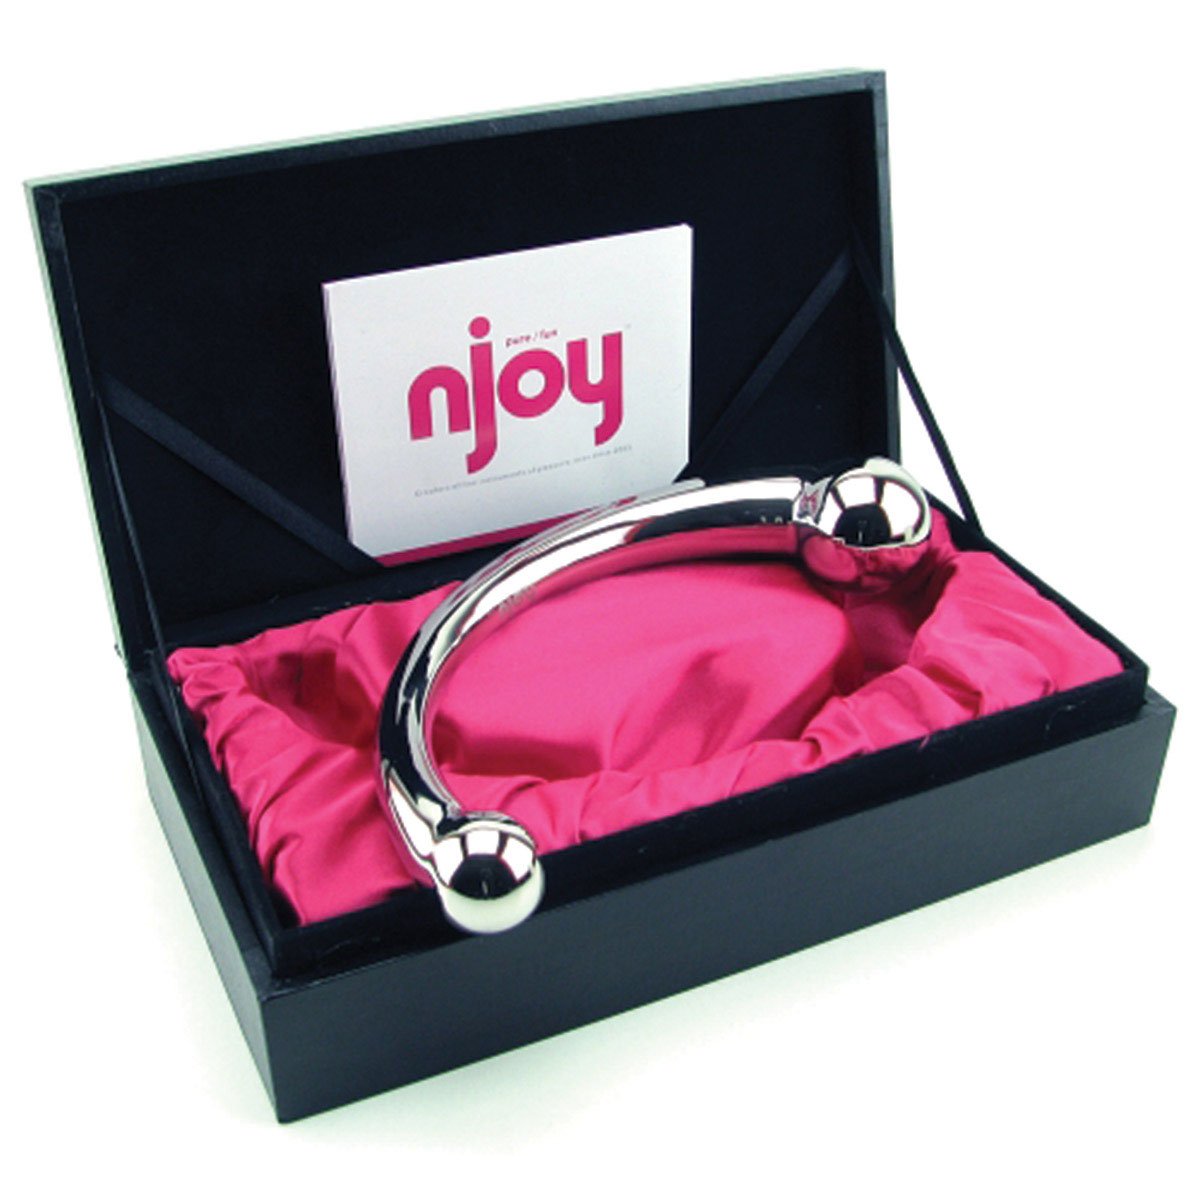 Njoy Pure Wand - Buy At Luxury Toy X - Free 3-Day Shipping